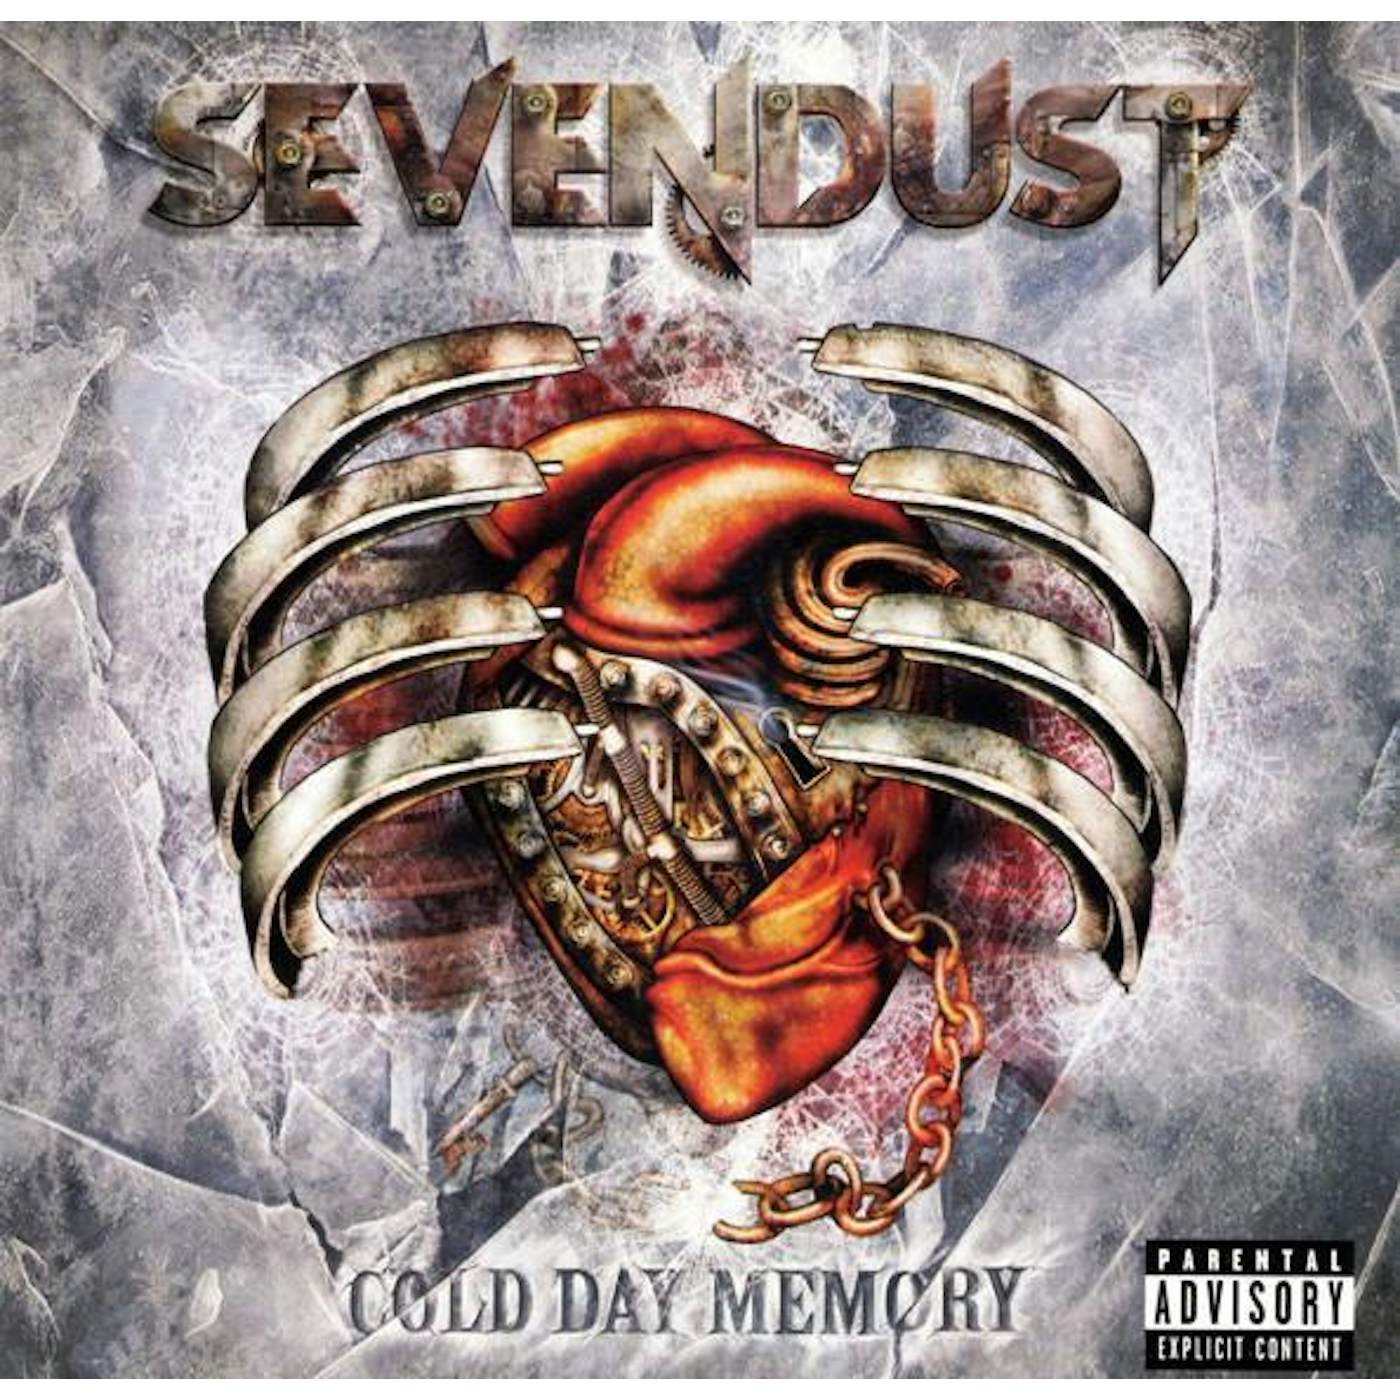 Sevendust COLD DAY MEMORY CD